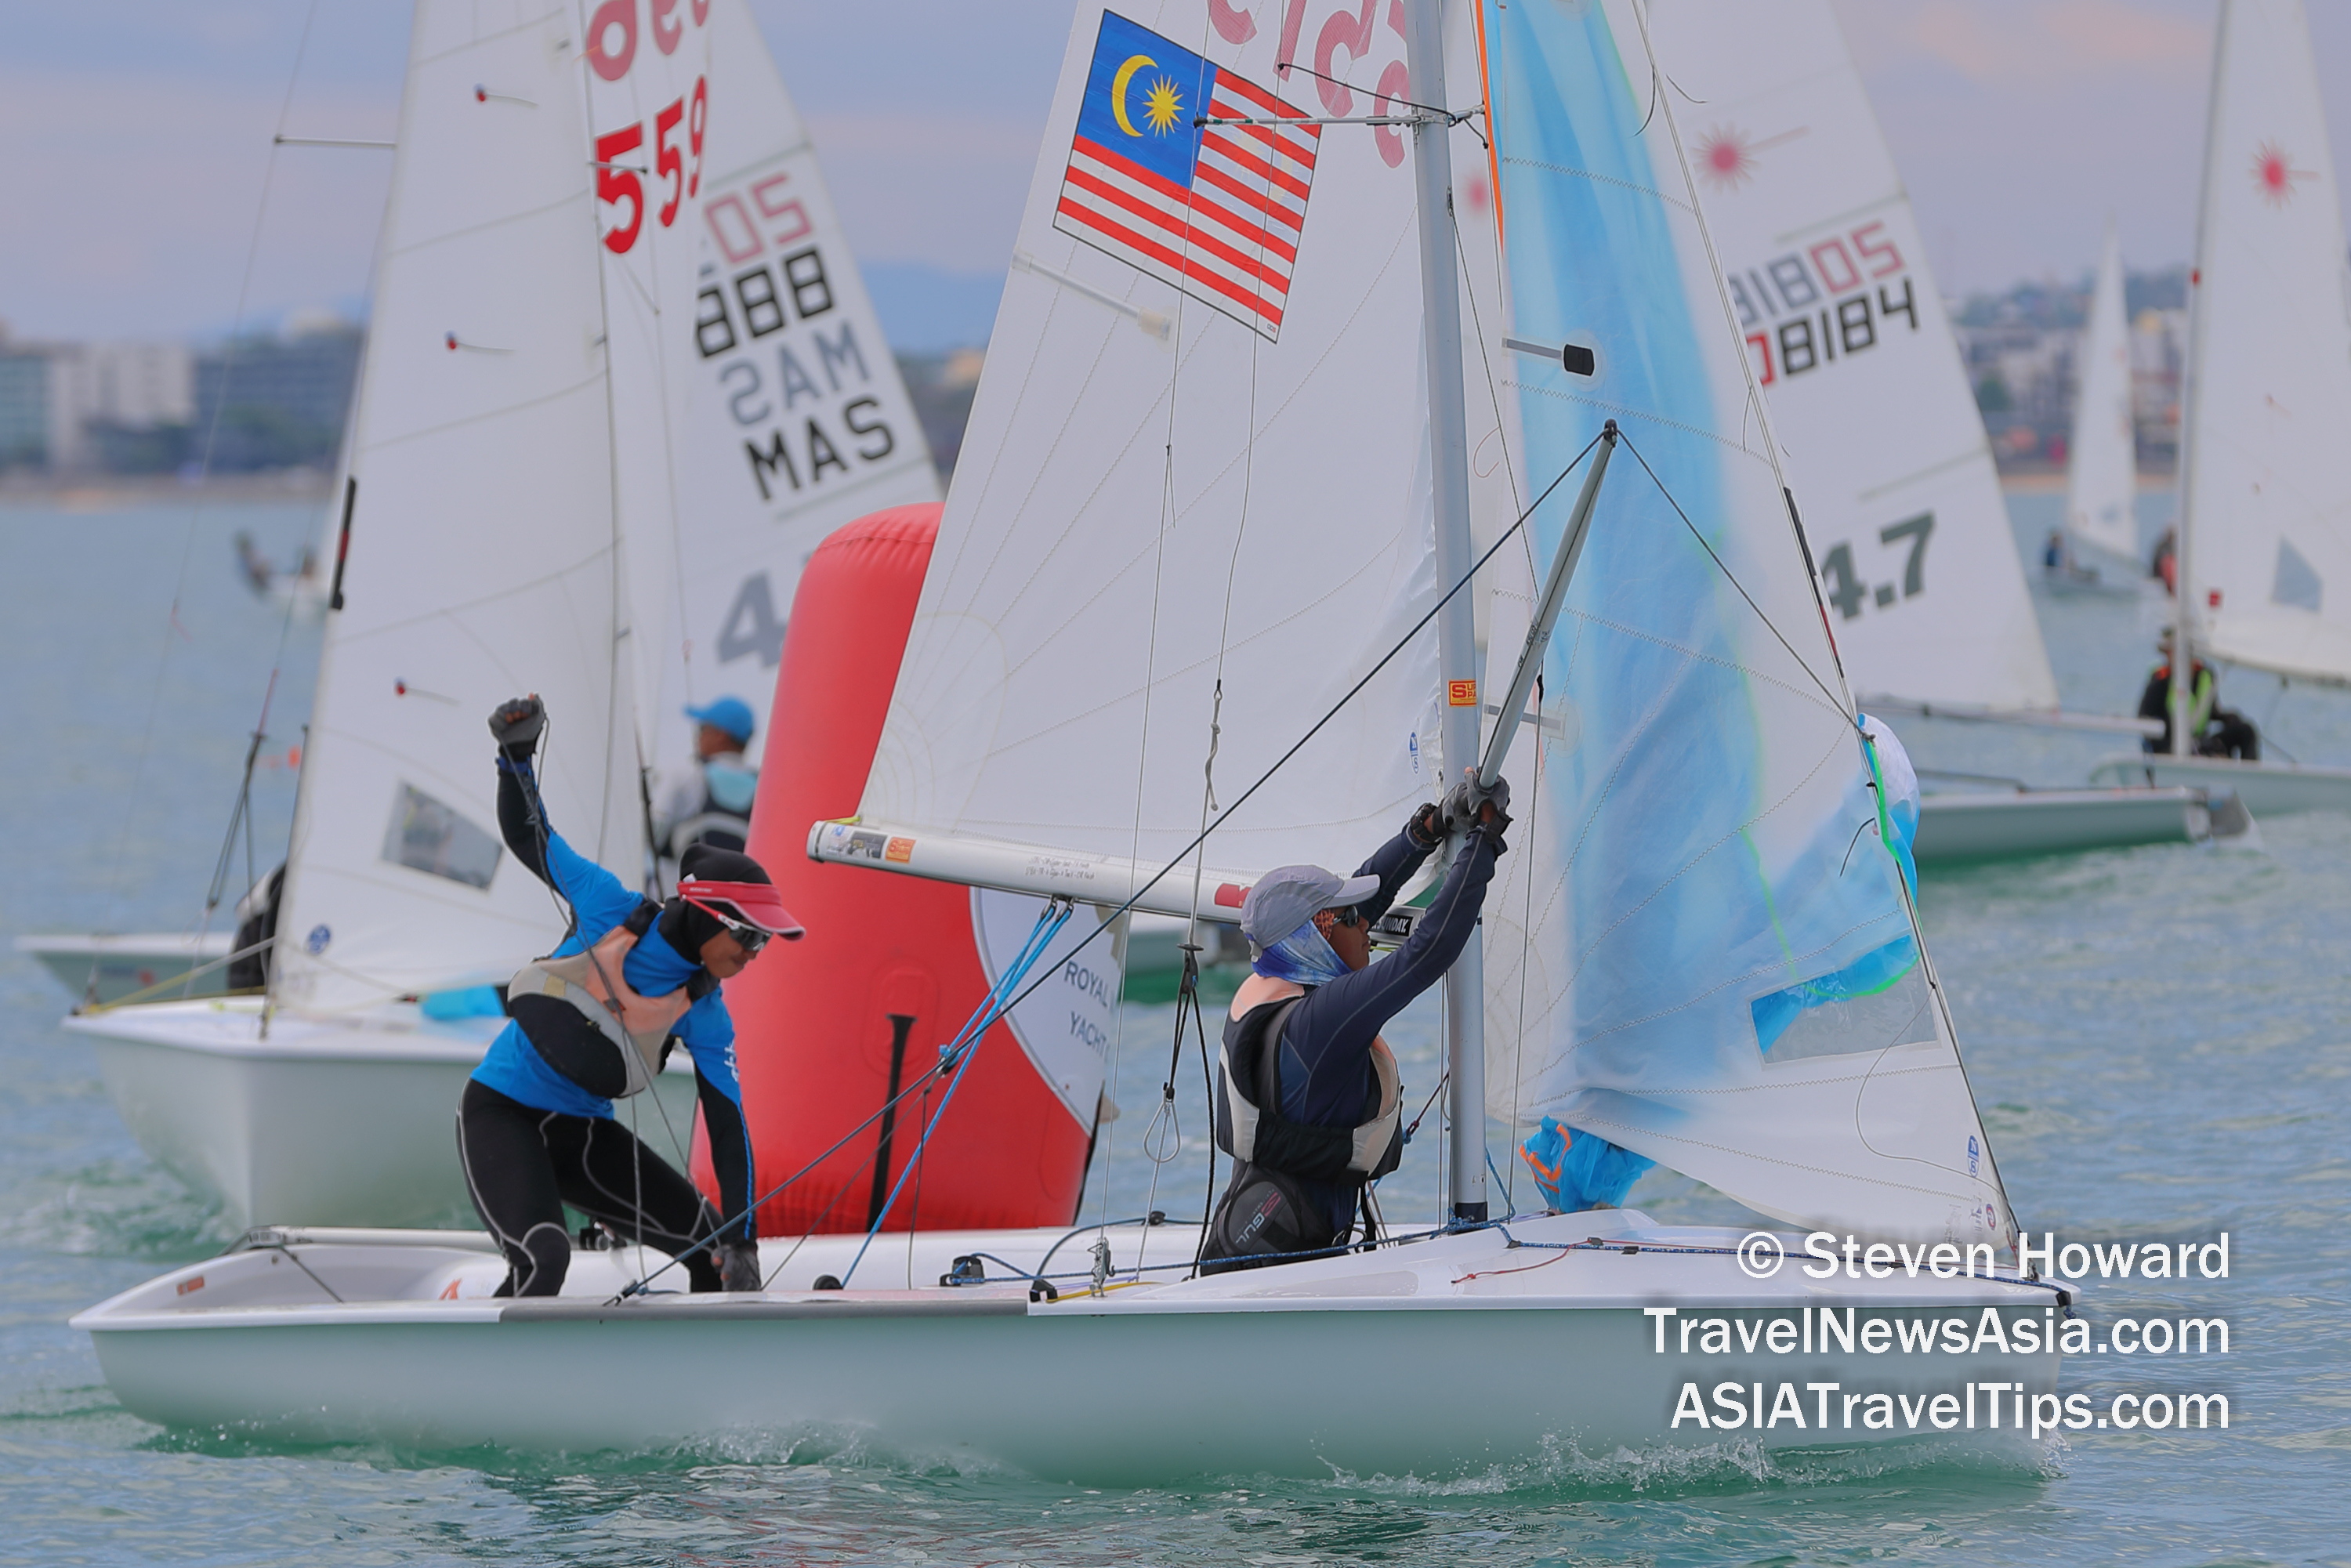 Dinghy action on Day 2 of the Top of the Gulf Regatta 2019 in Pattaya, Thailand Picture by Steven Howard of TravelNewsAsia.com Click to enlarge.